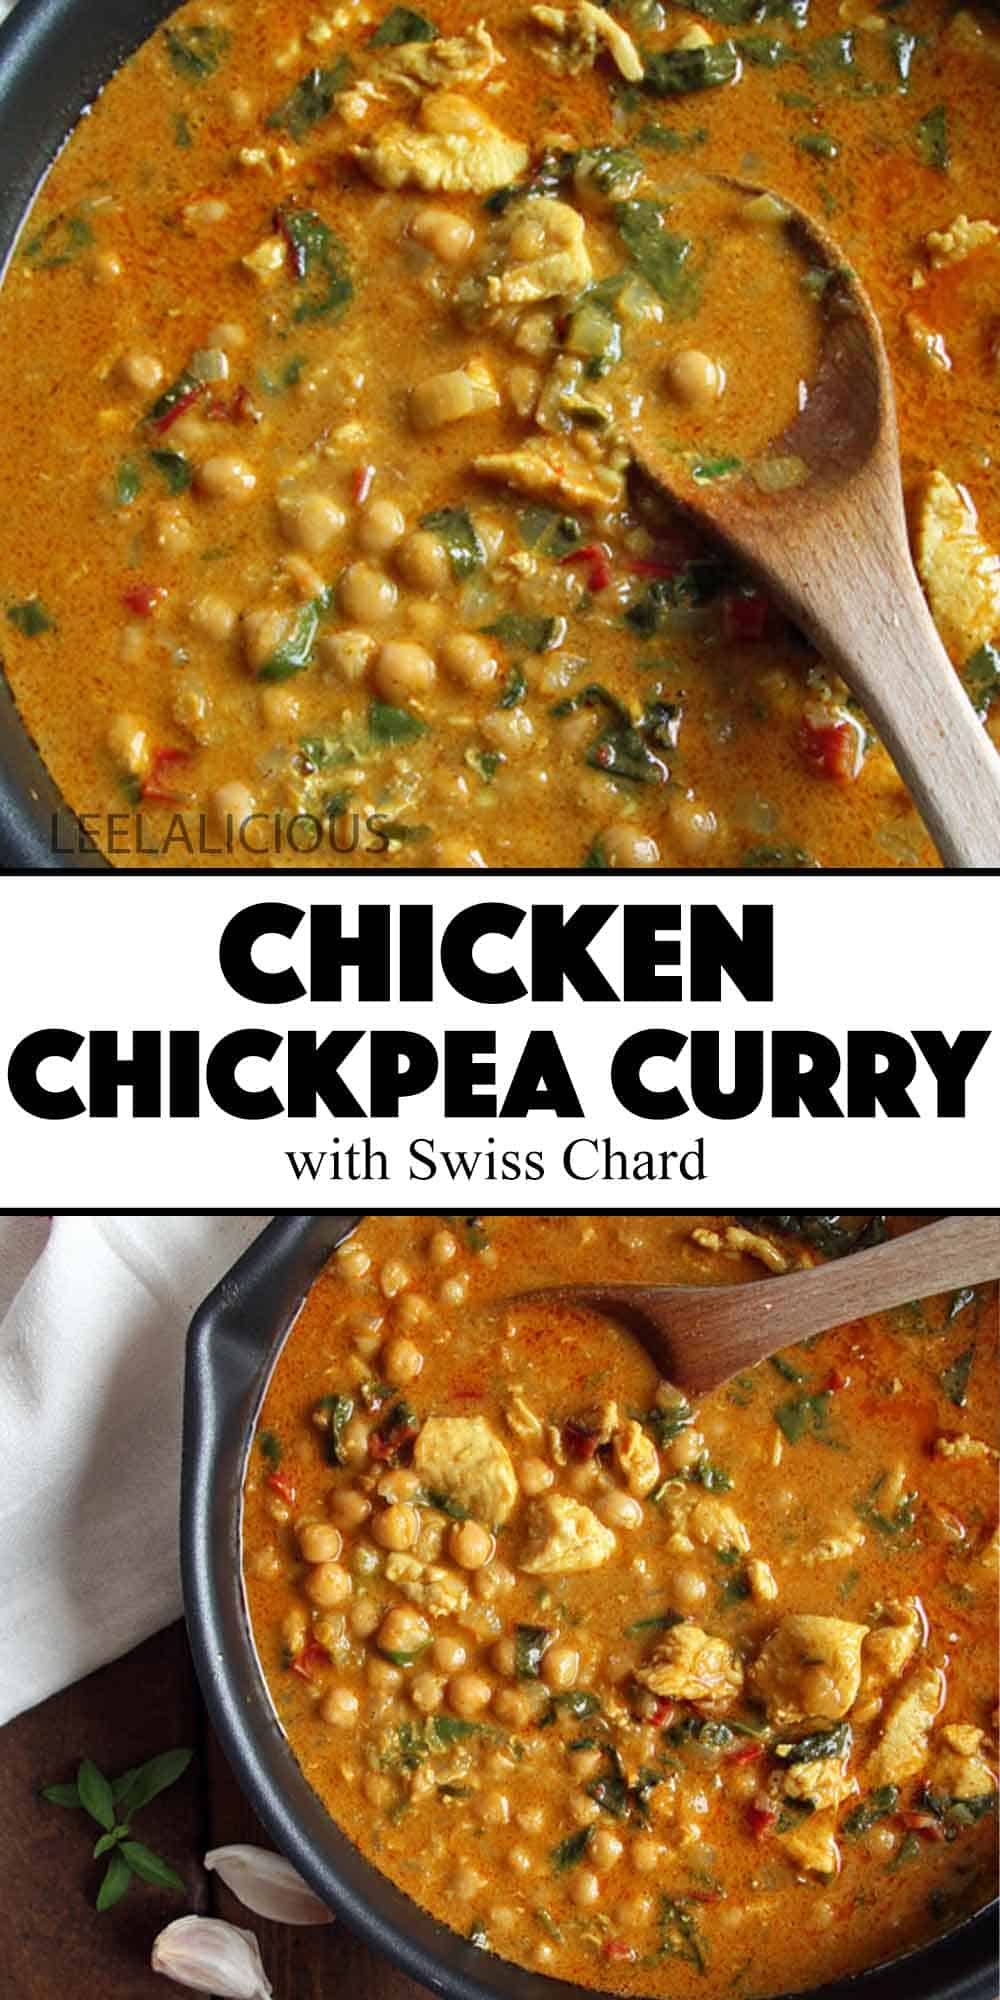 Chicken Chickpea Curry with Swiss Chard